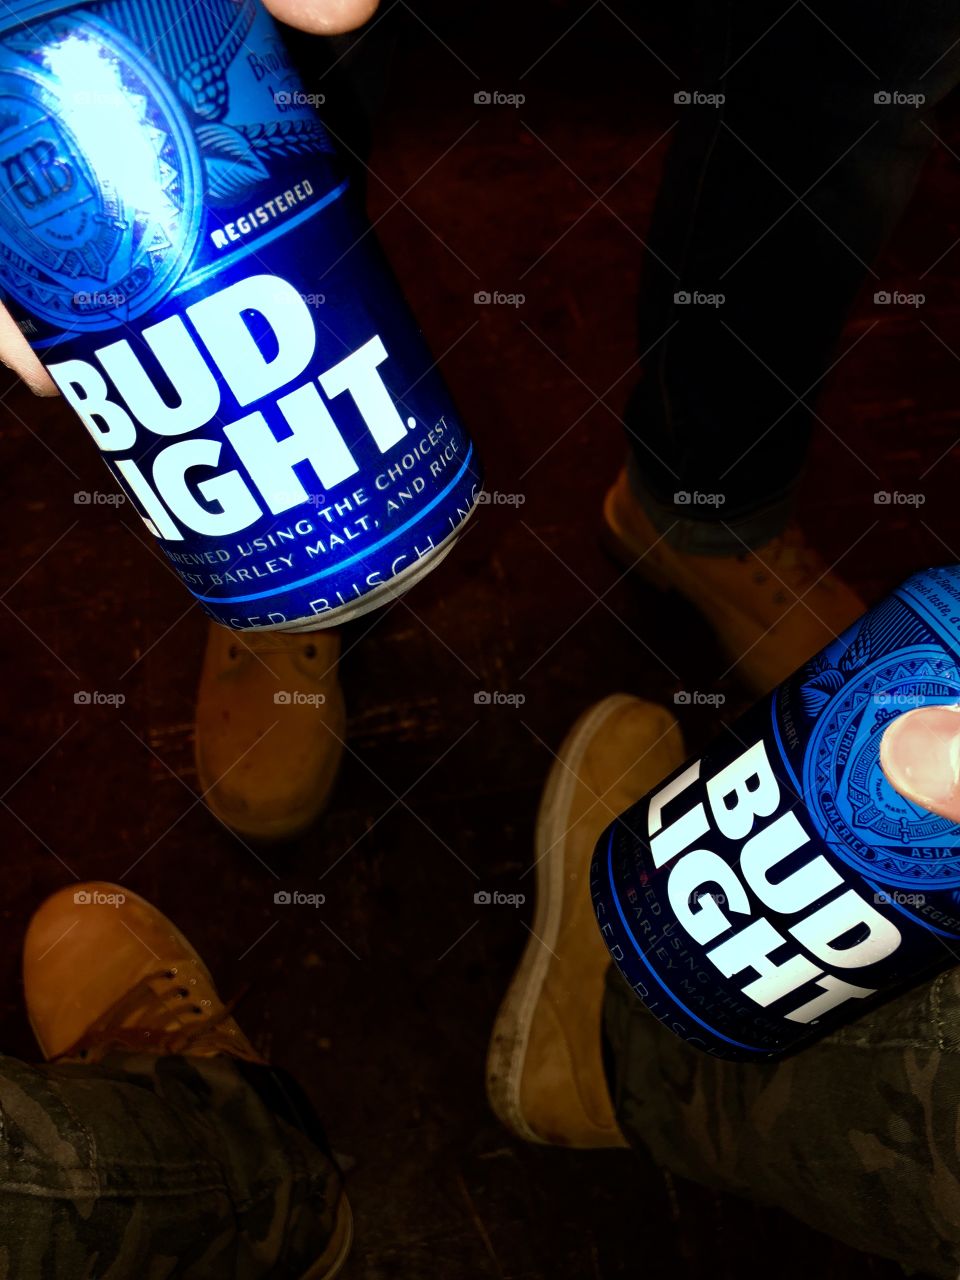 Timbs and Budlight are the Friday Night go too